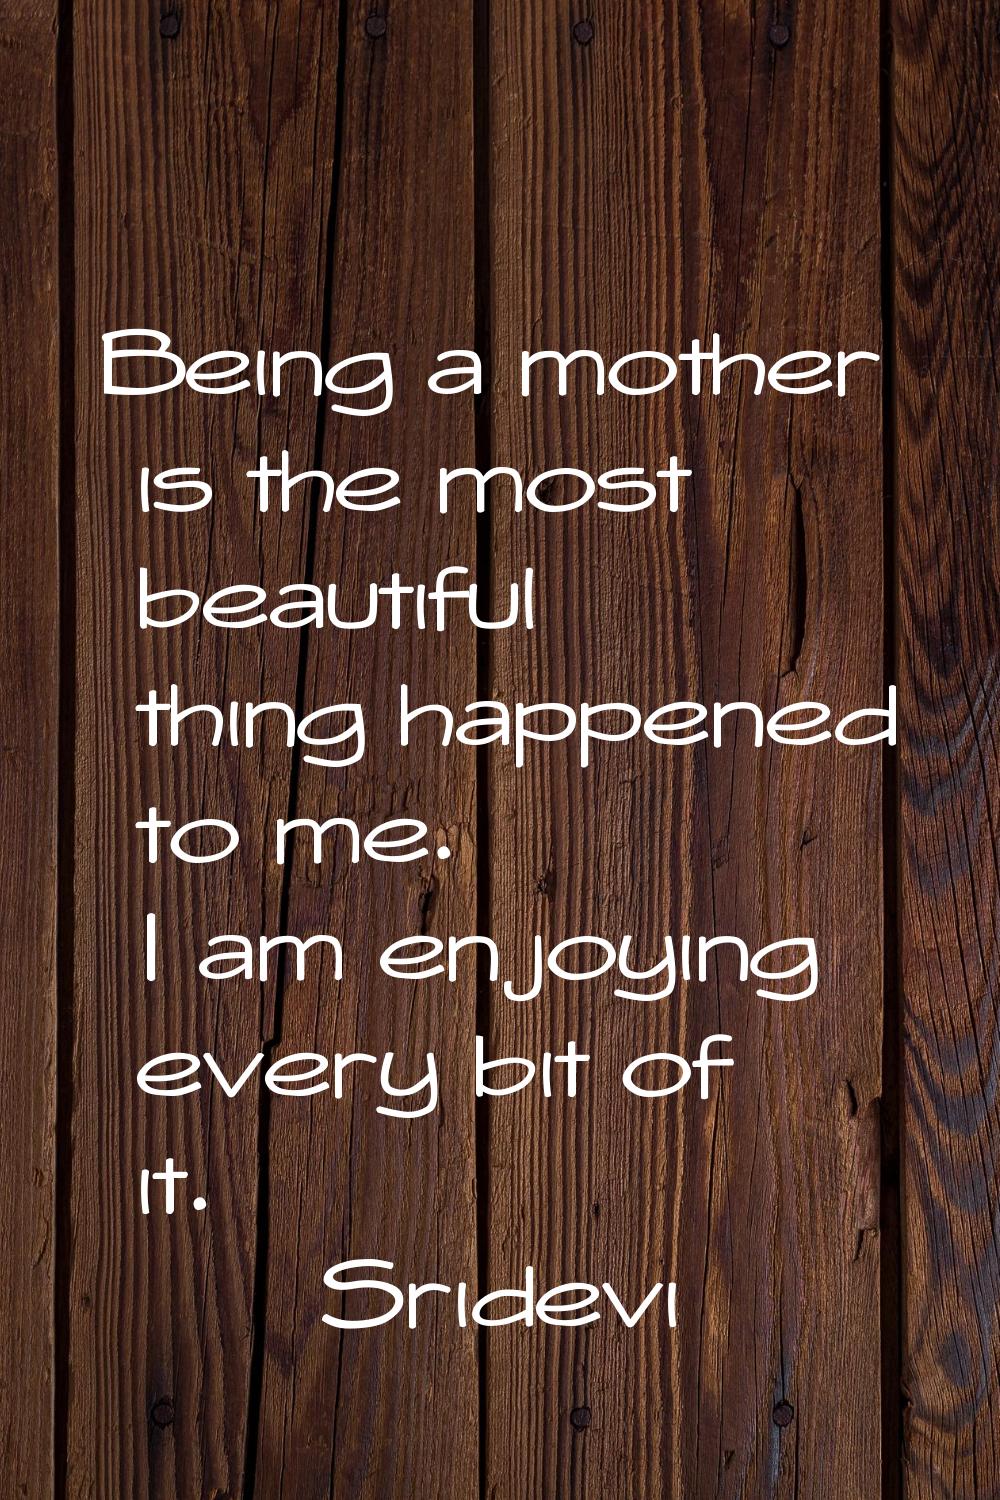 Being a mother is the most beautiful thing happened to me. I am enjoying every bit of it.